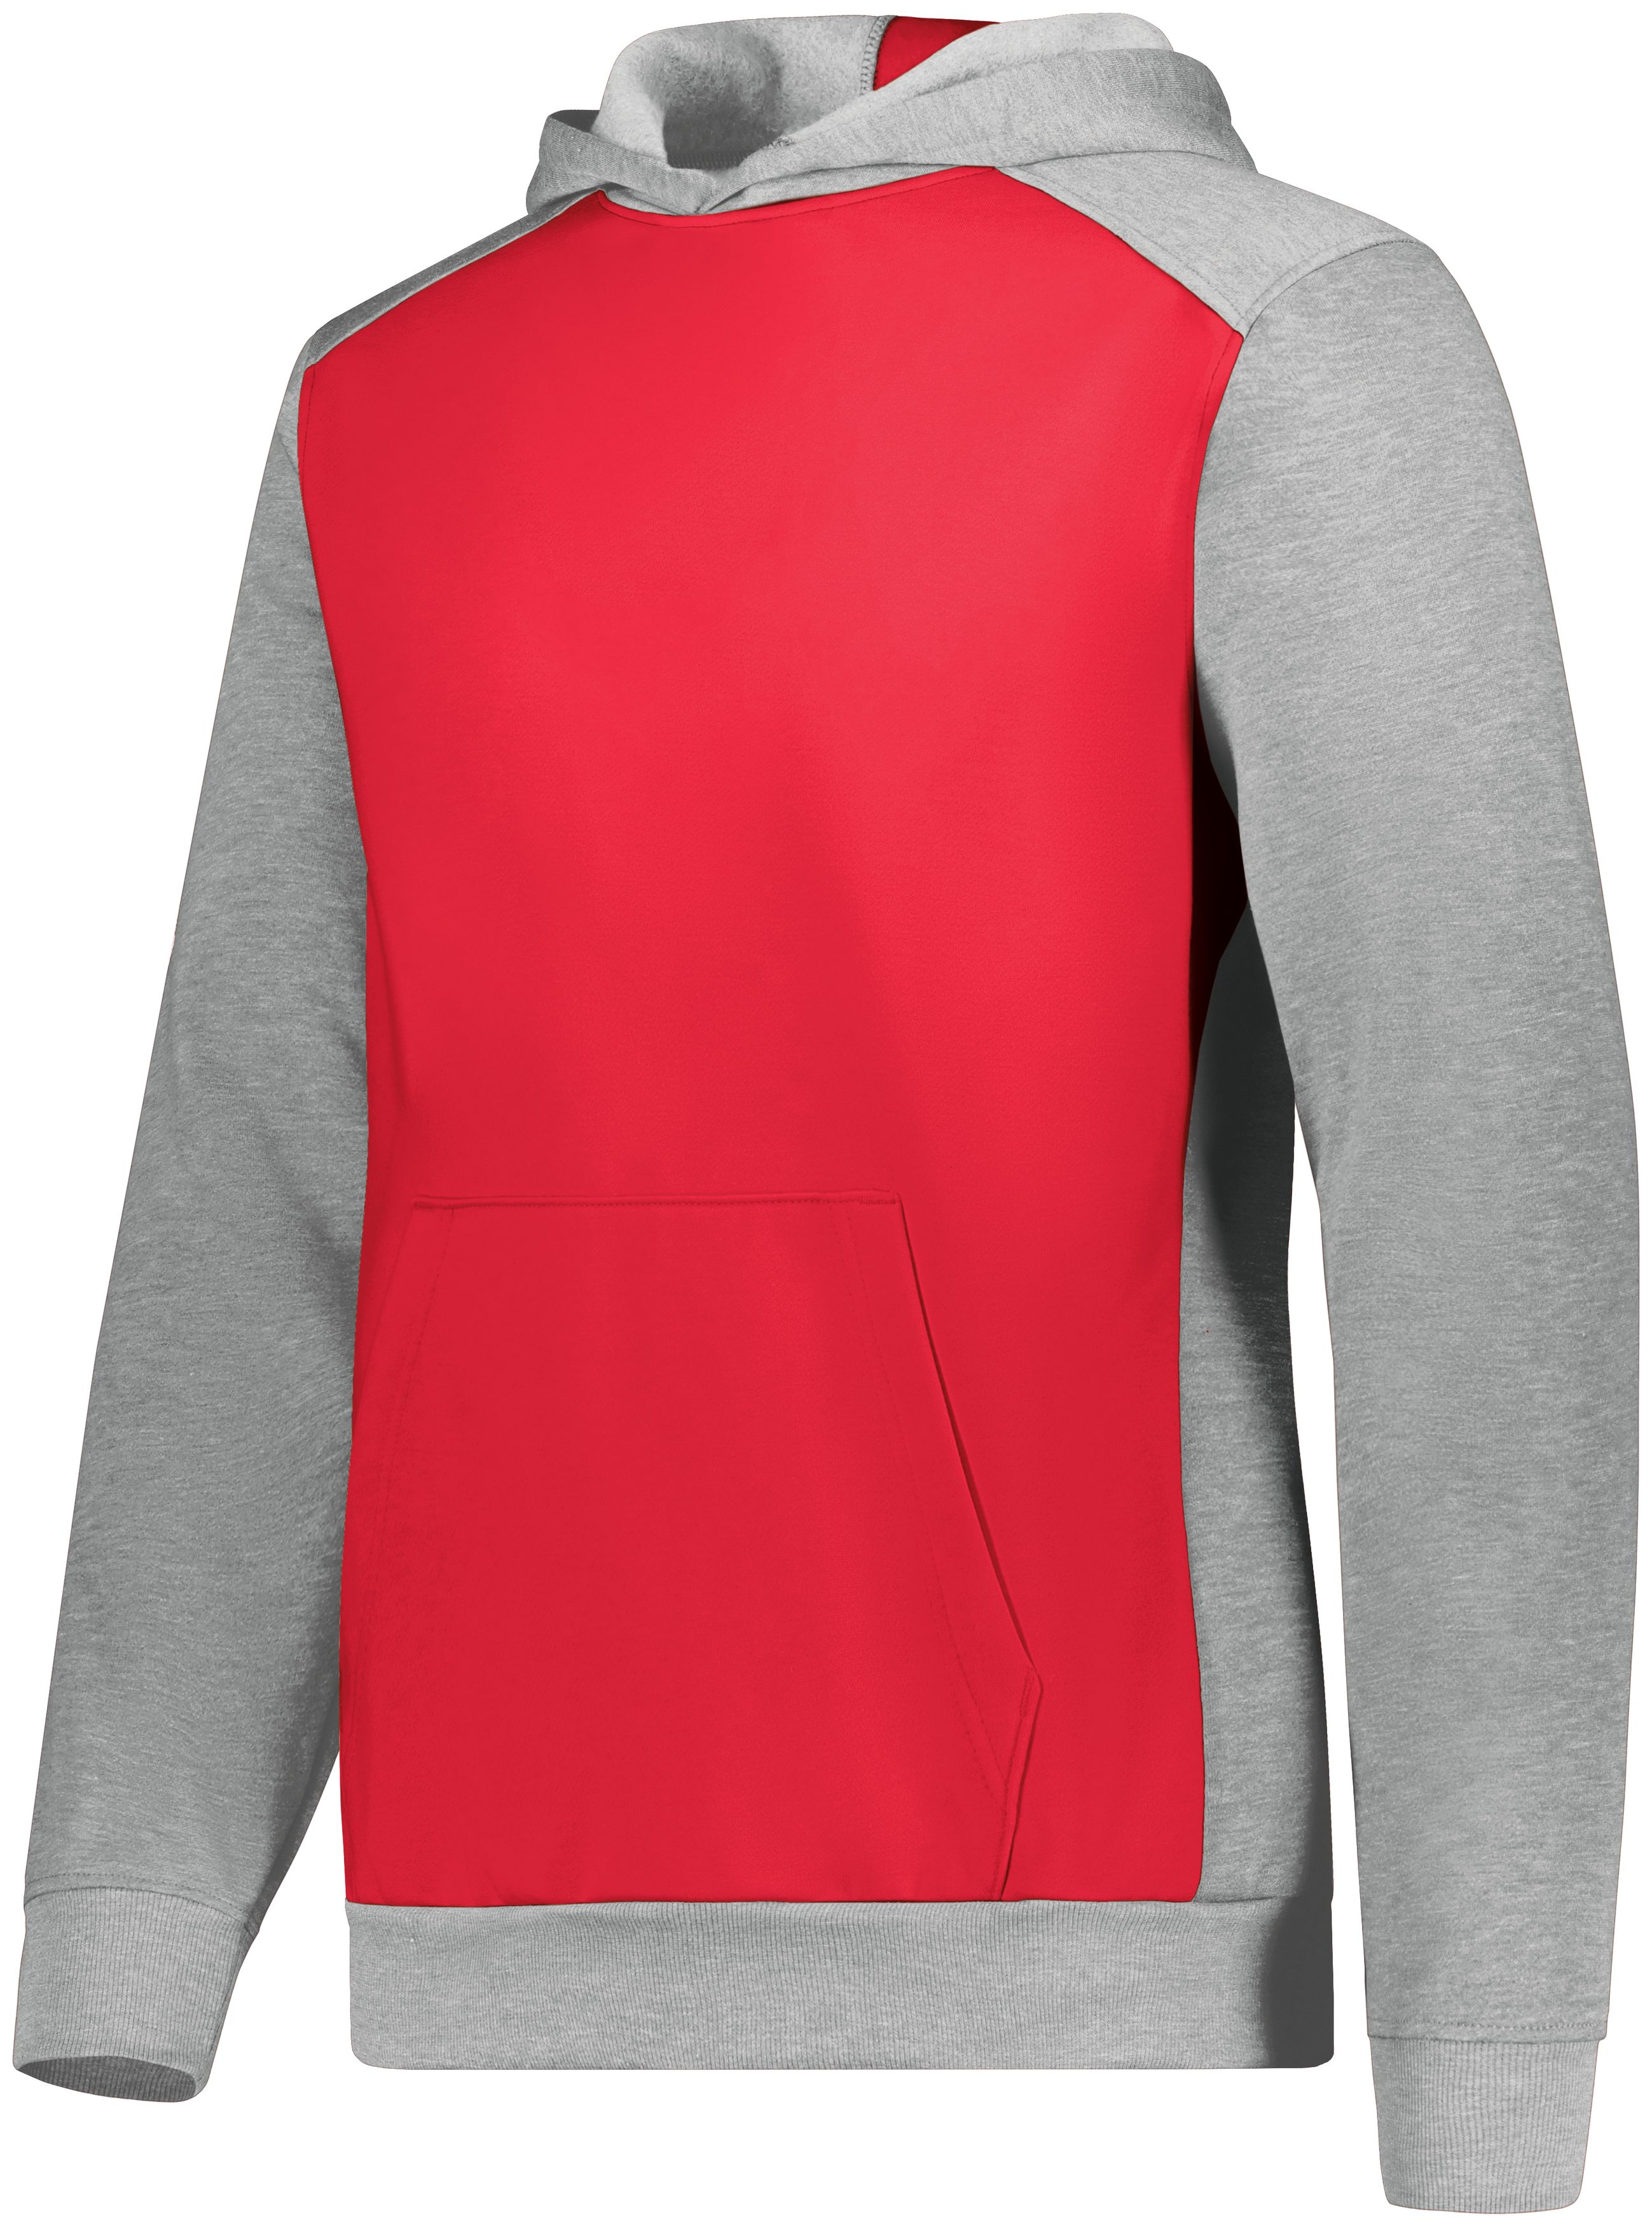 click to view Scarlet/Grey Heather